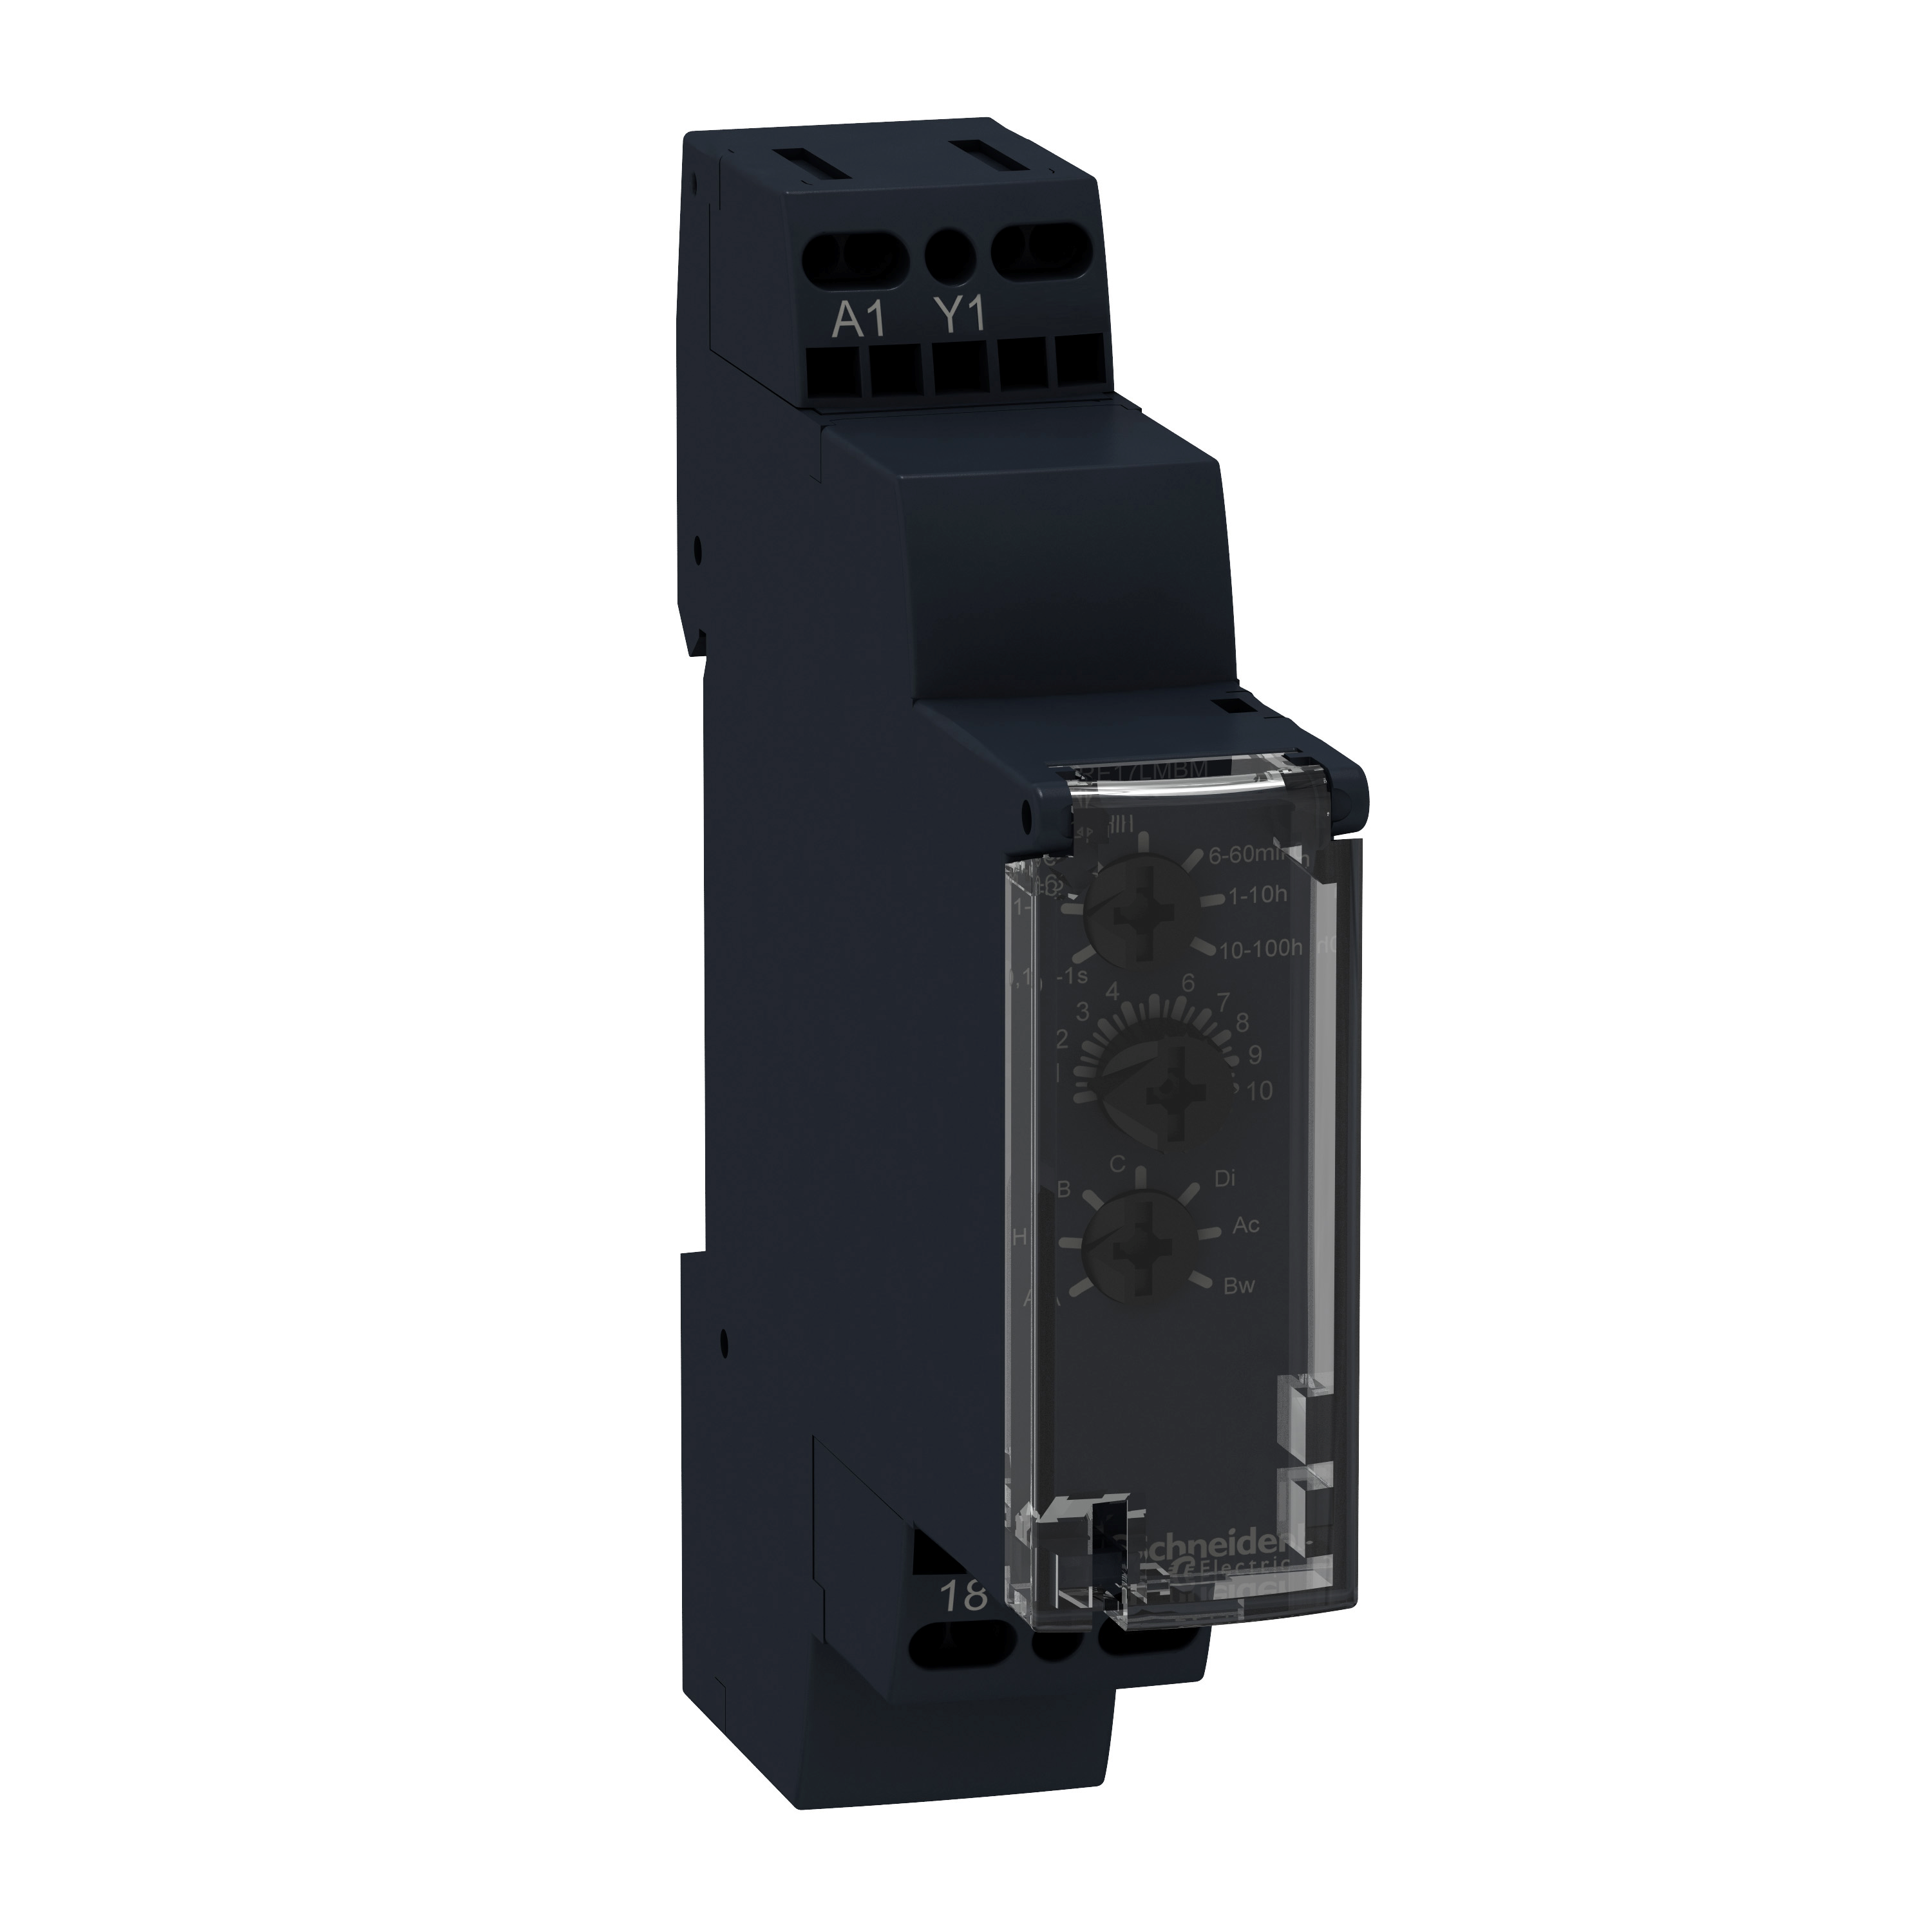 single function relay, Harmony Timer Relays, 0.7A, 1s..100h, multifunction, solid state output, 24 to 240V AC